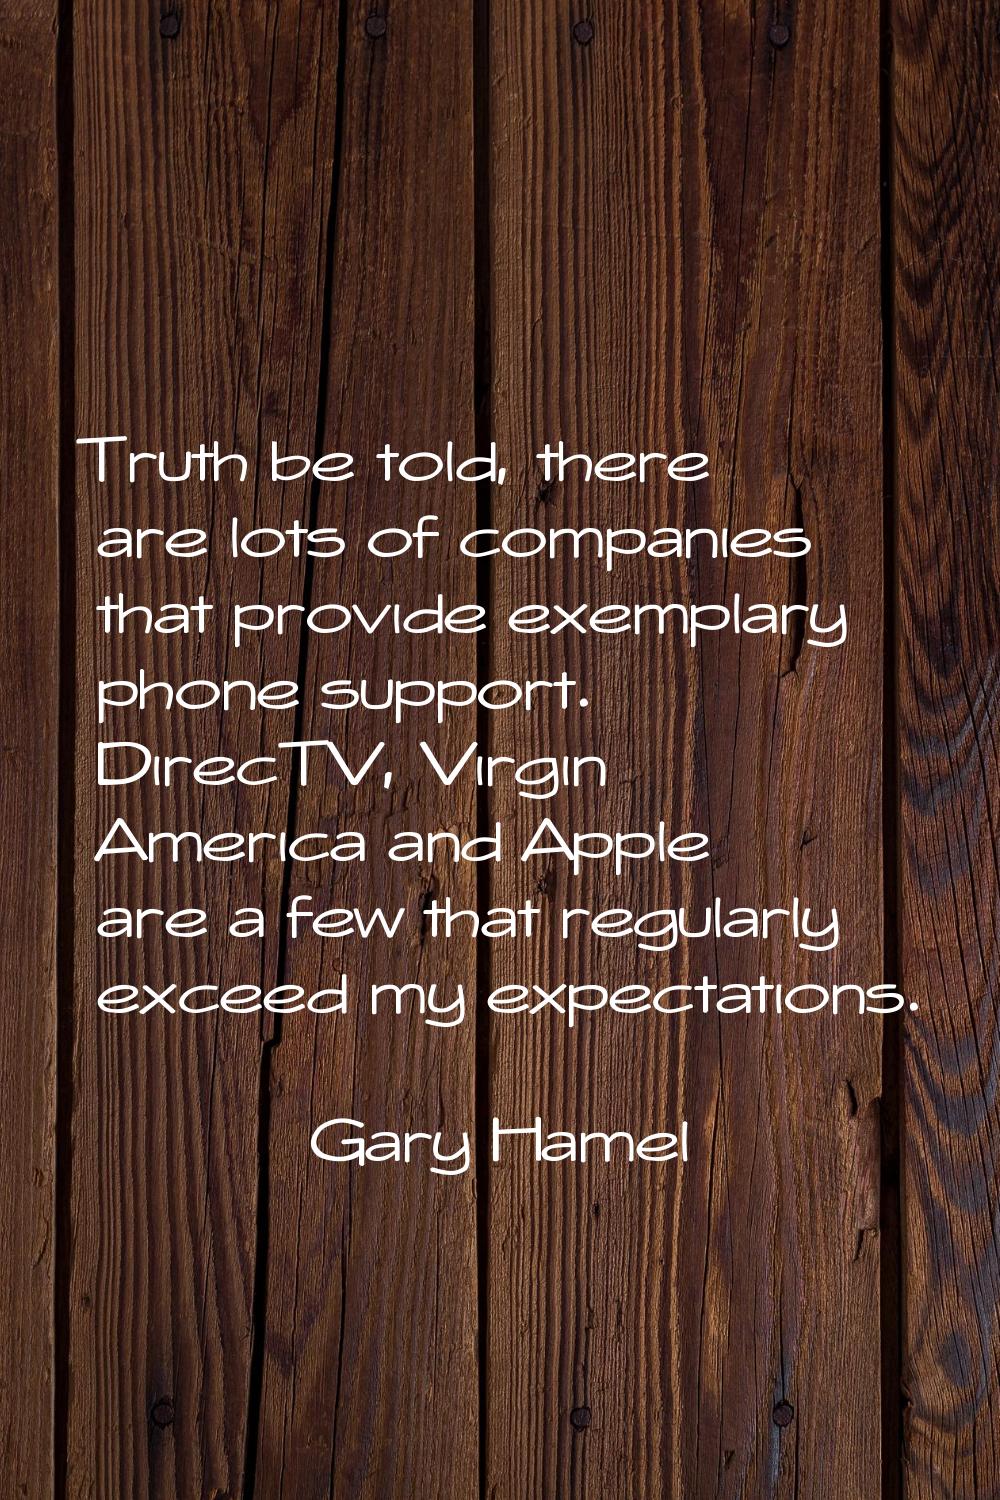 Truth be told, there are lots of companies that provide exemplary phone support. DirecTV, Virgin Am